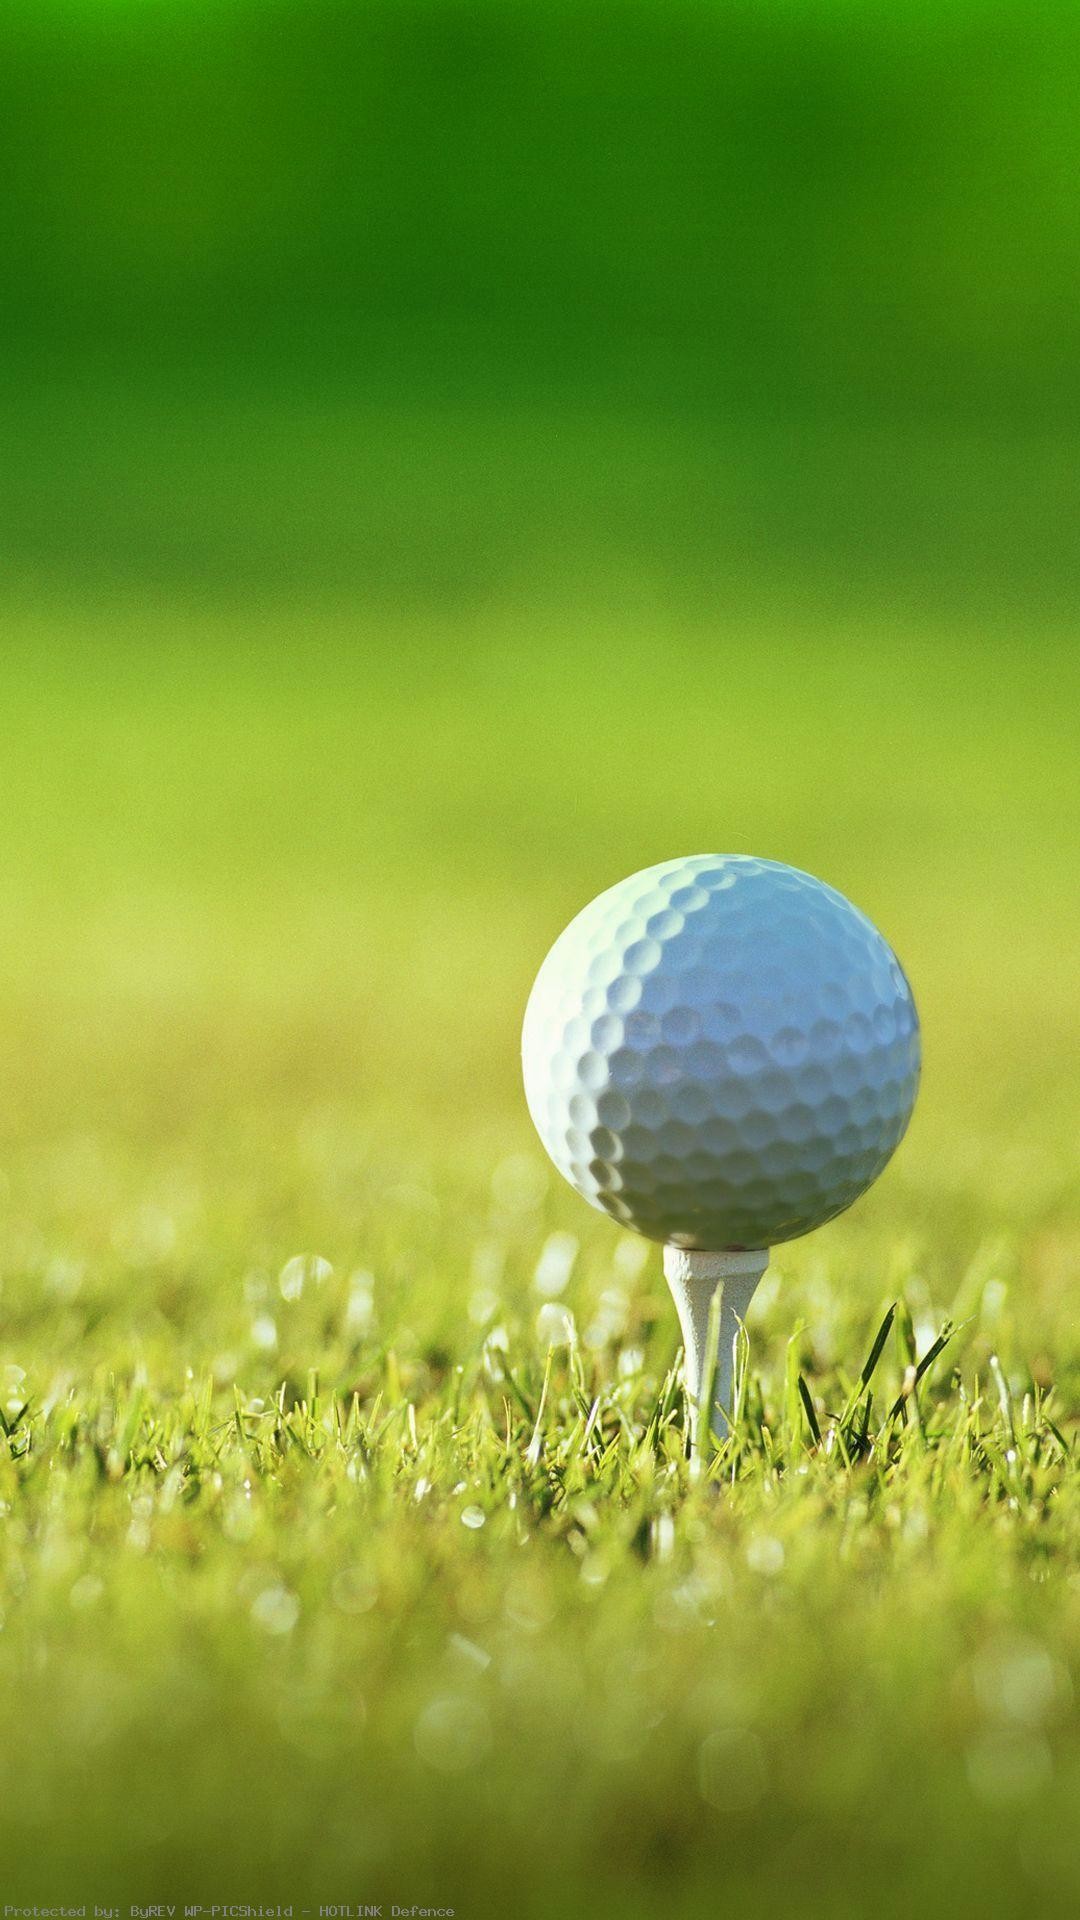 1080x1920 Golf-for-LG-Nexus-hd-android-free-download-